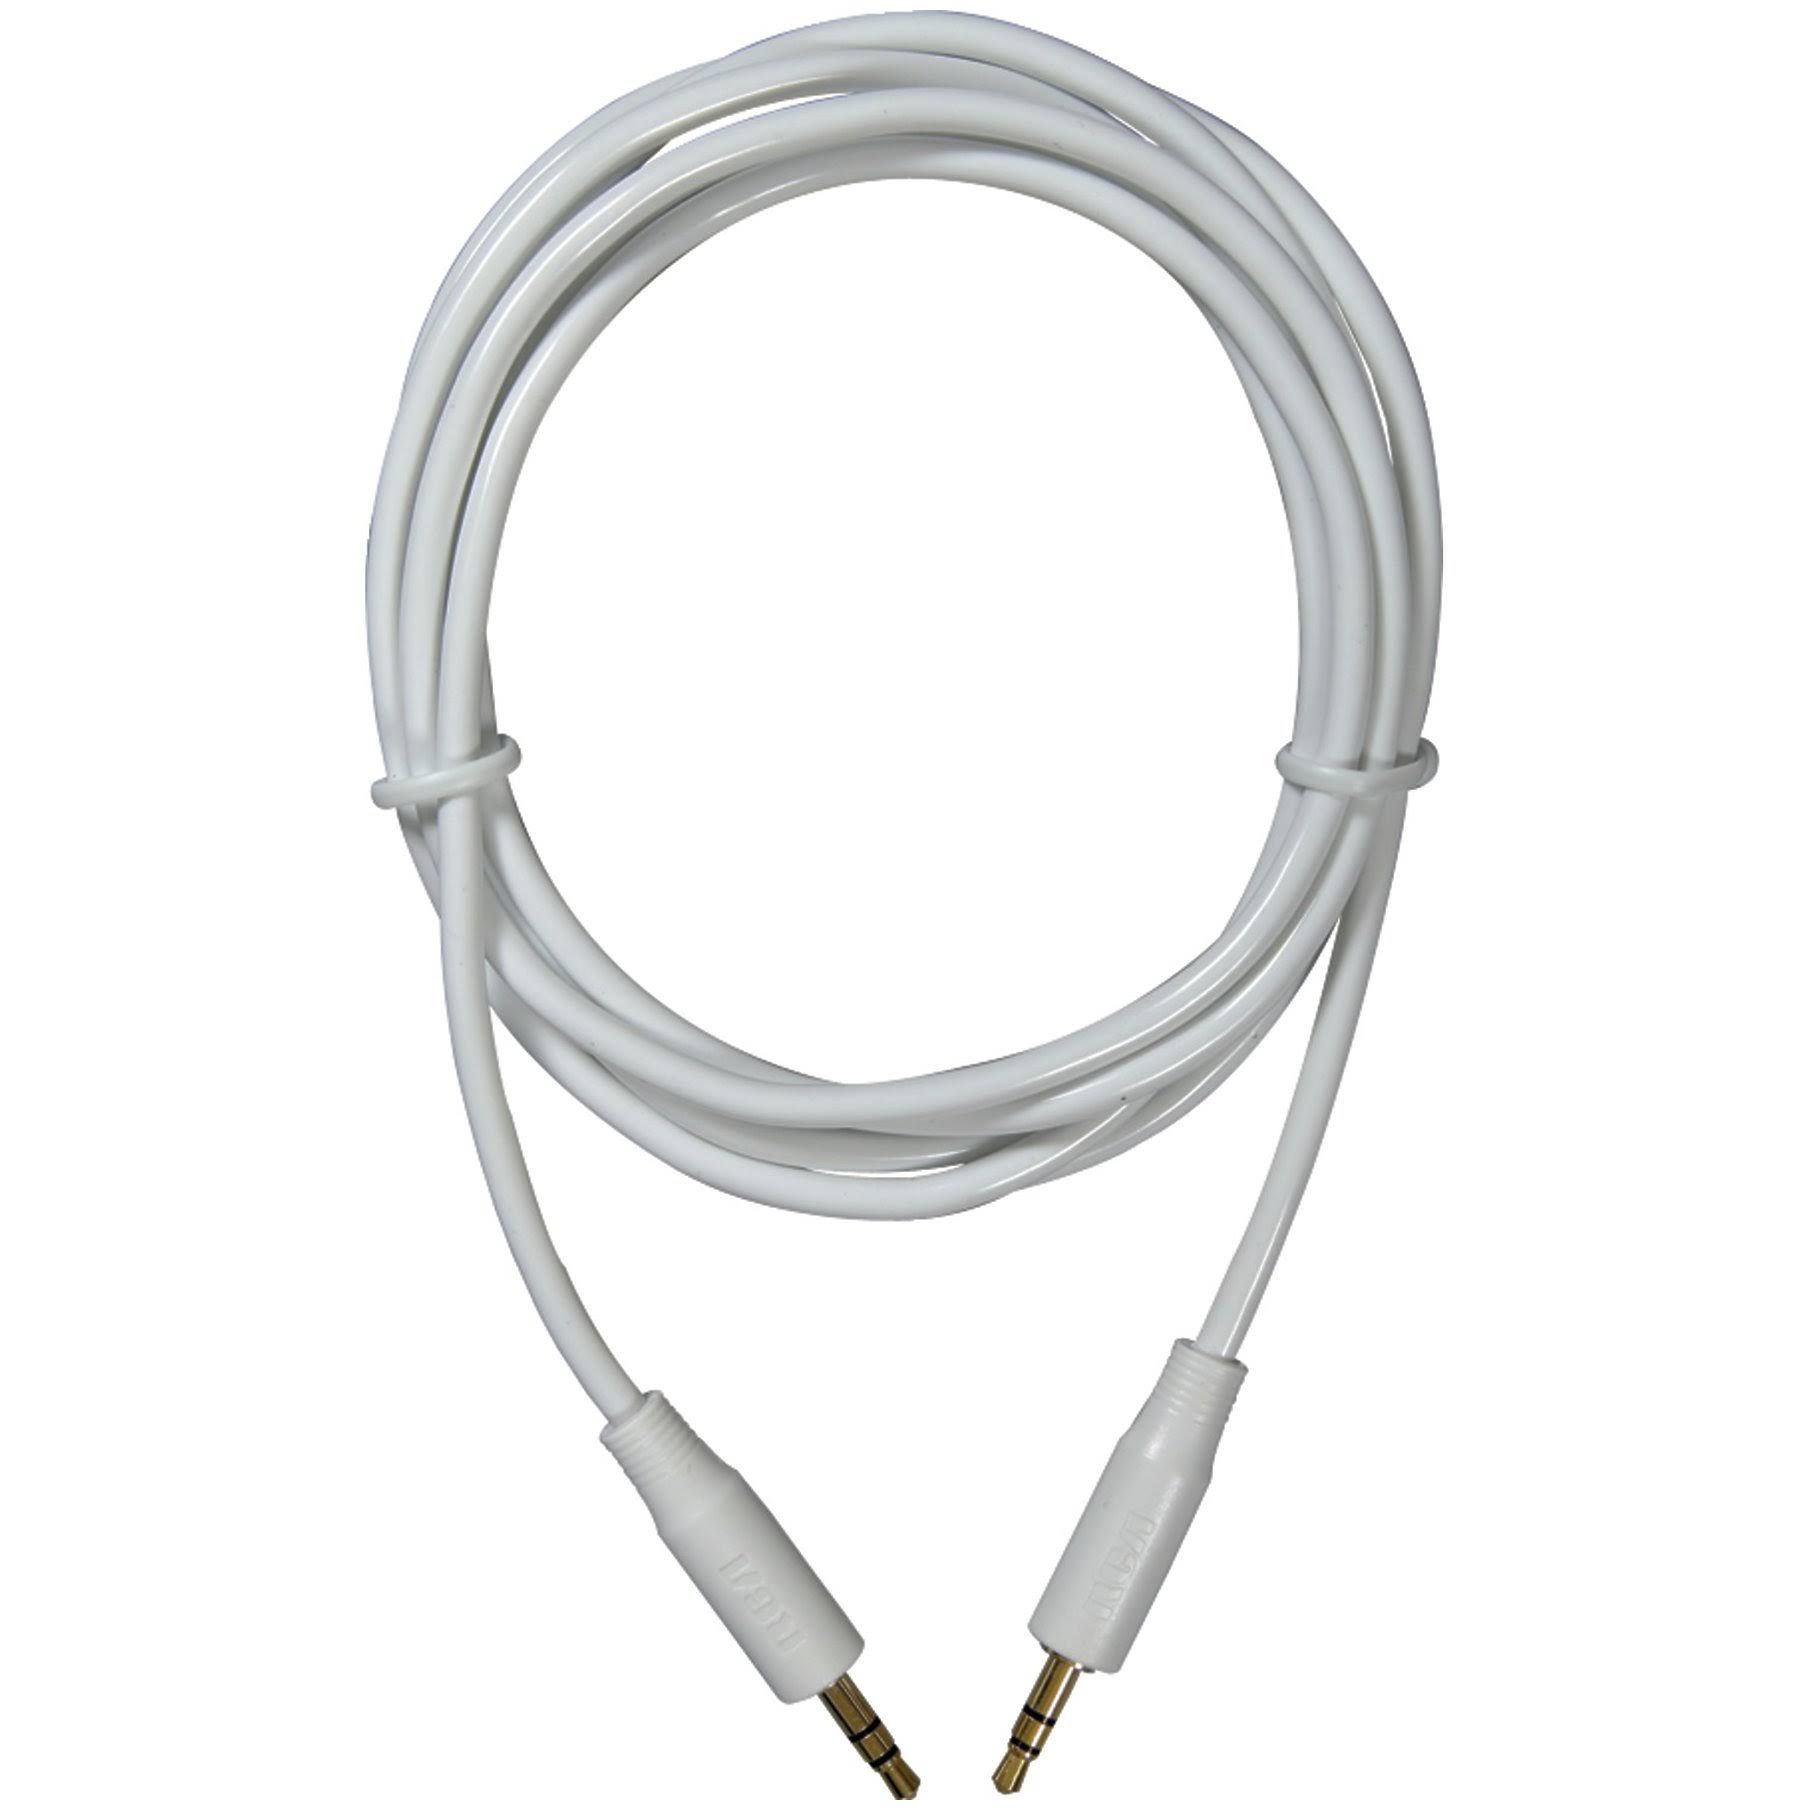 MP3 Audio Cable, White, 3.5mm, 6-Ft.